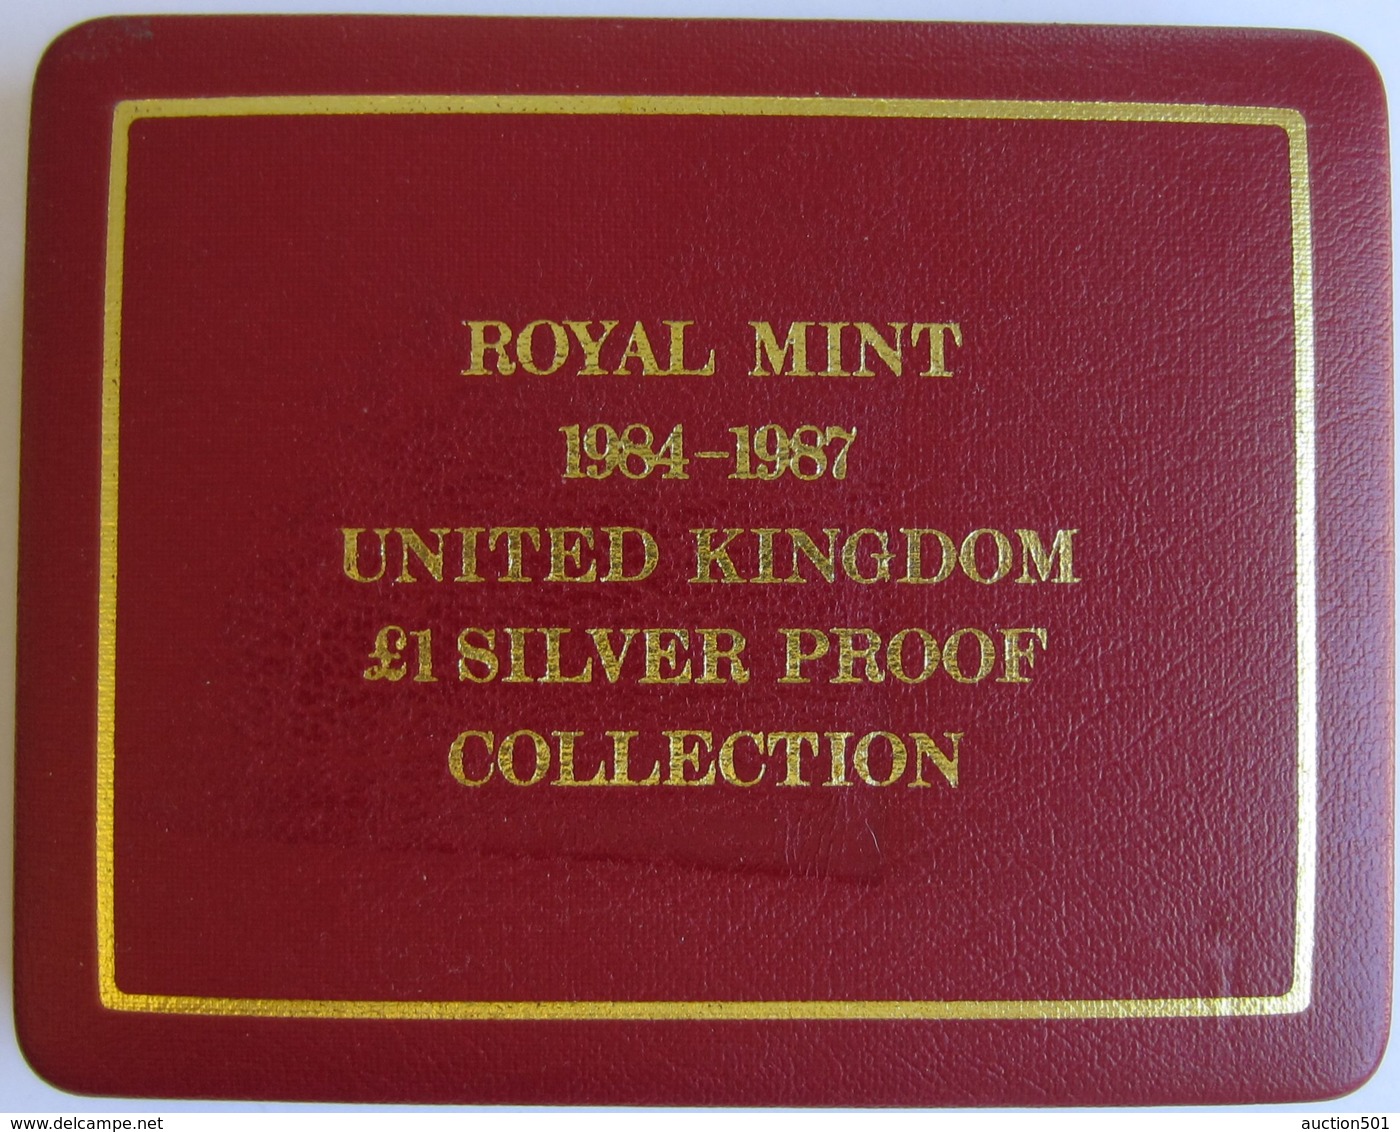 28258g  ROYAL MINT -  1984-1987 - UNITED KINGDOM - £1 SILVER PROOF -COLLECTION - Mint Sets & Proof Sets